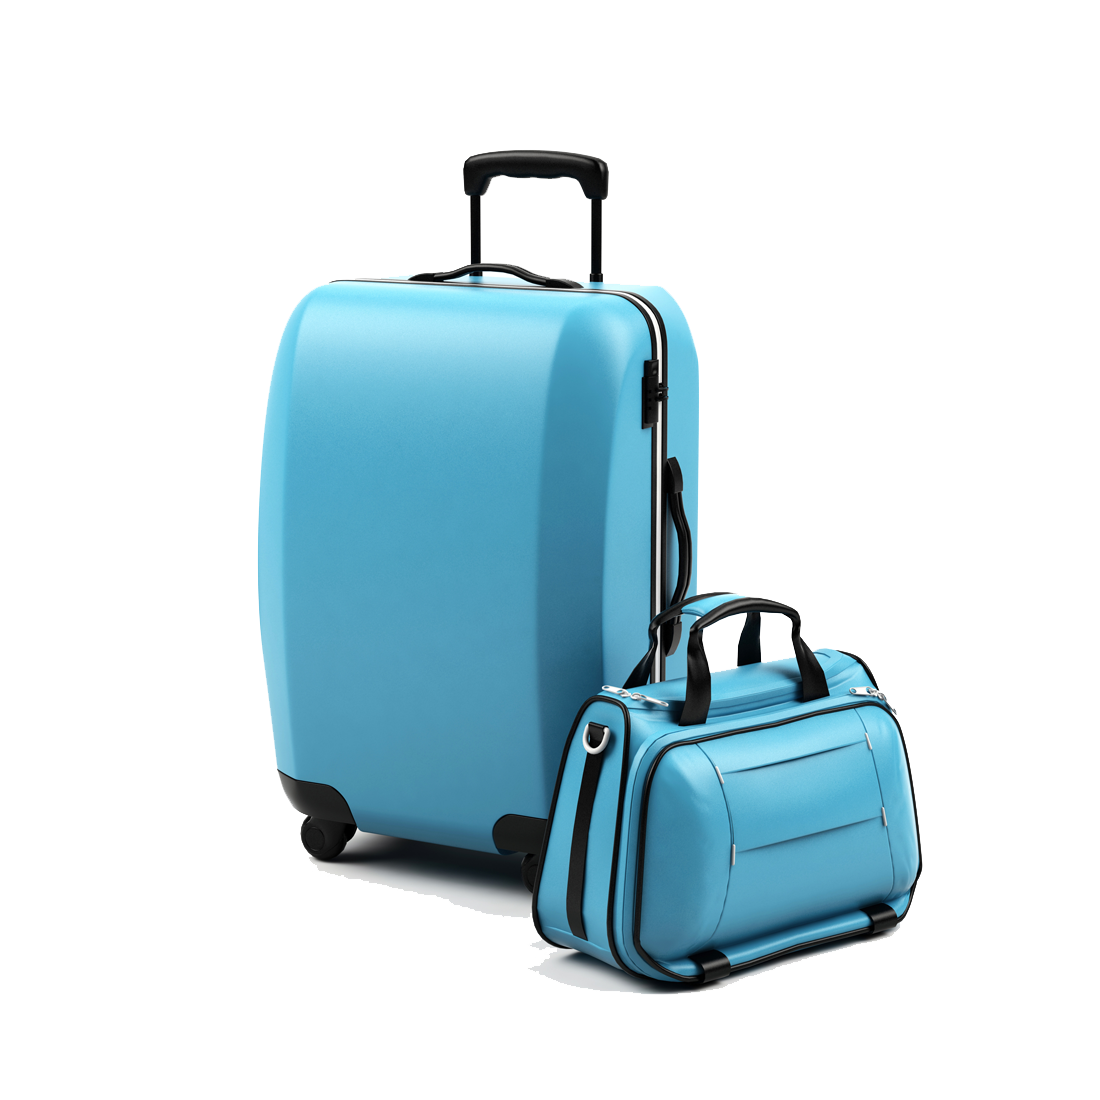 Blue Suitcase Luggage PNG HD 